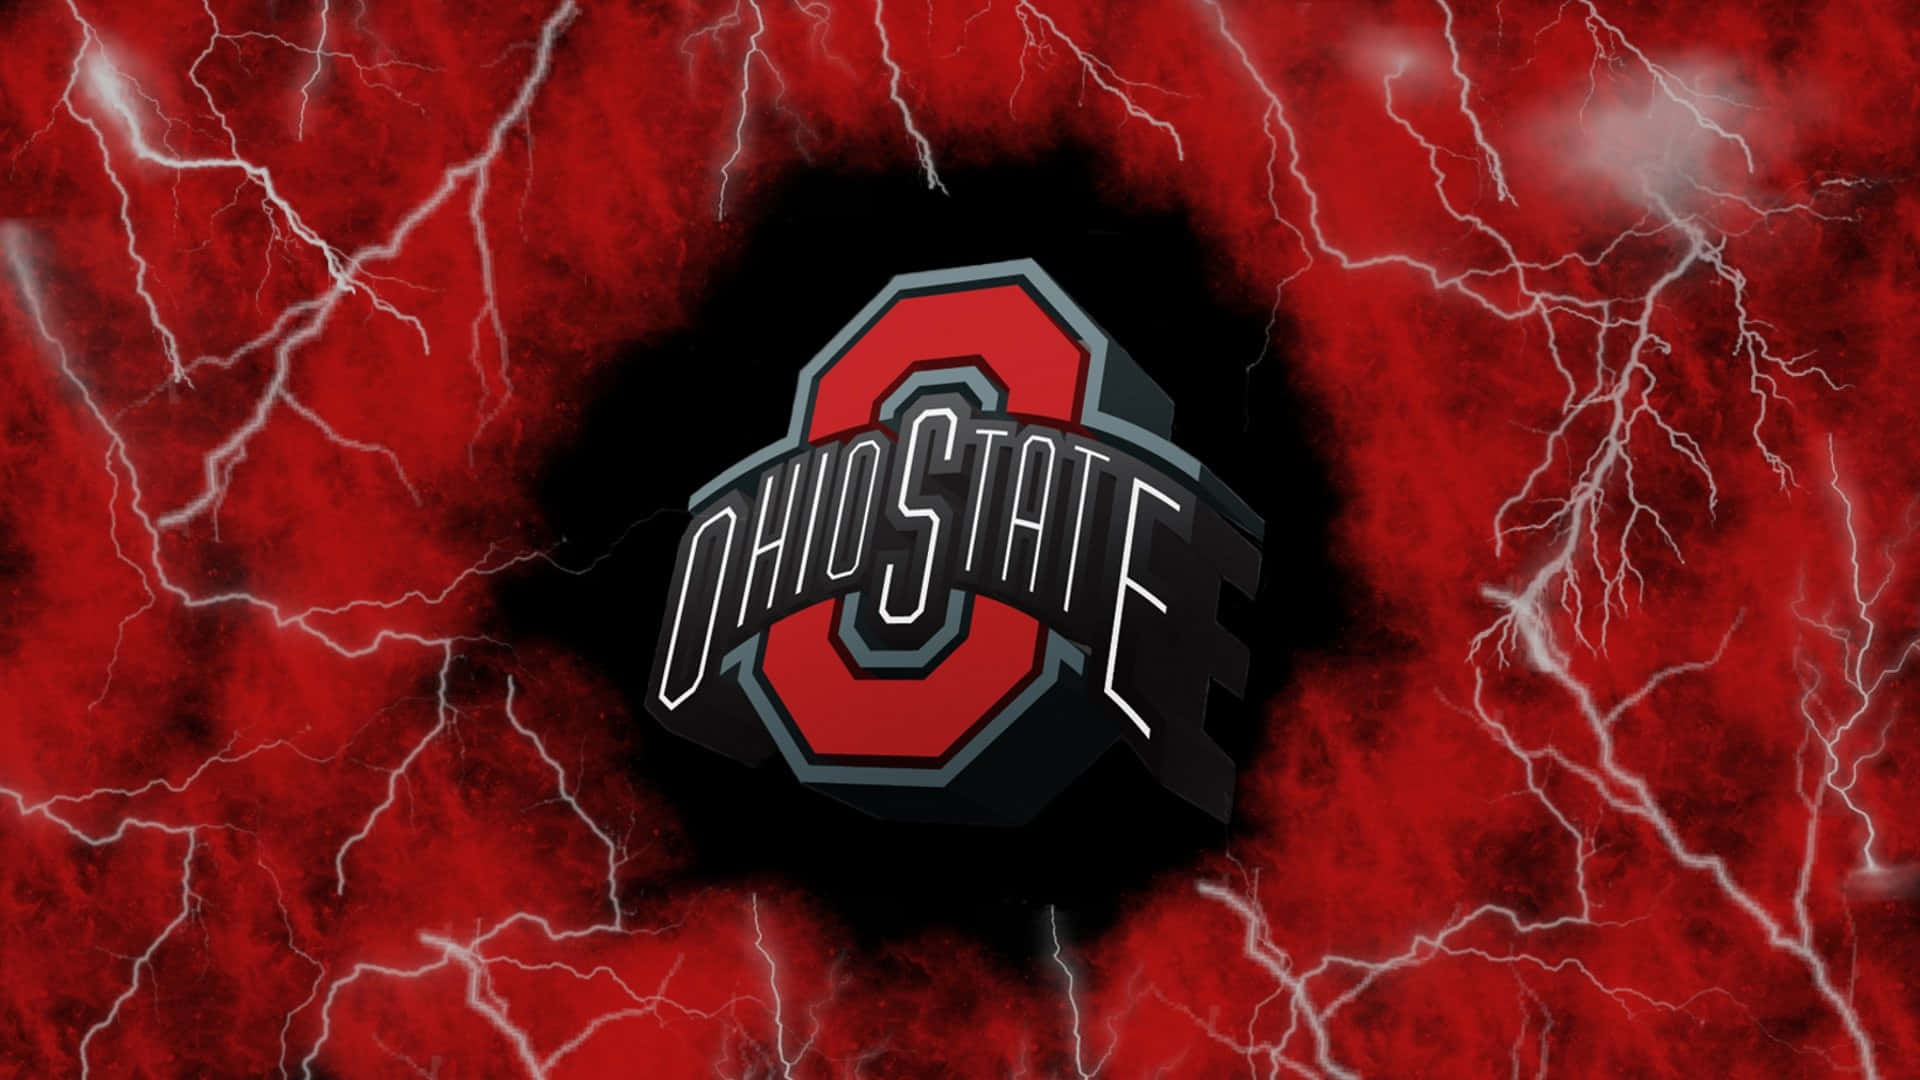 Take pride in showing your Ohio State University spirit with this cool image! Wallpaper